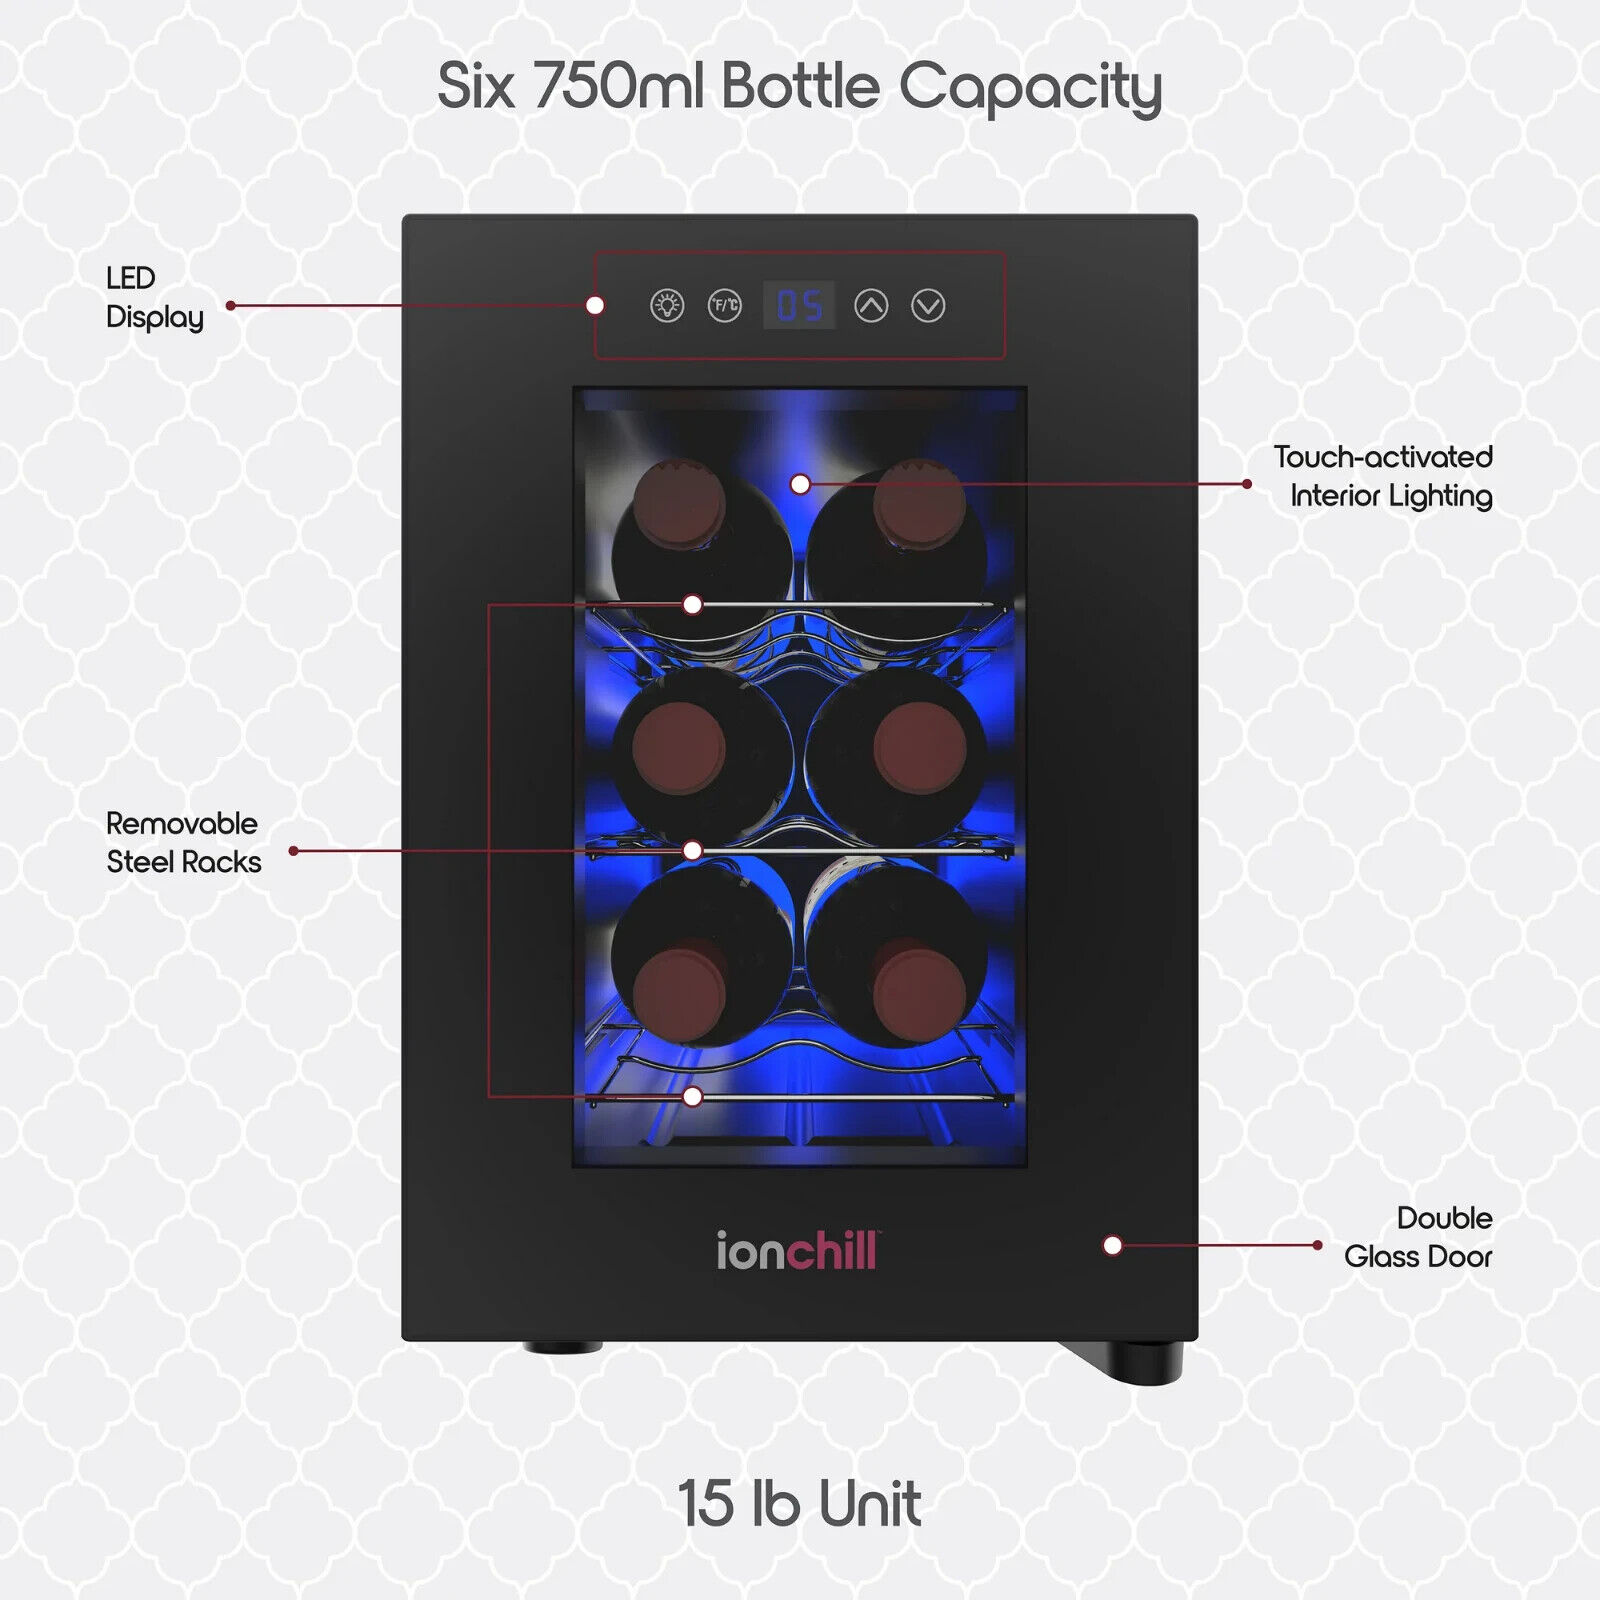 Compact 6-Bottle Wine Fridge with Temperature Control